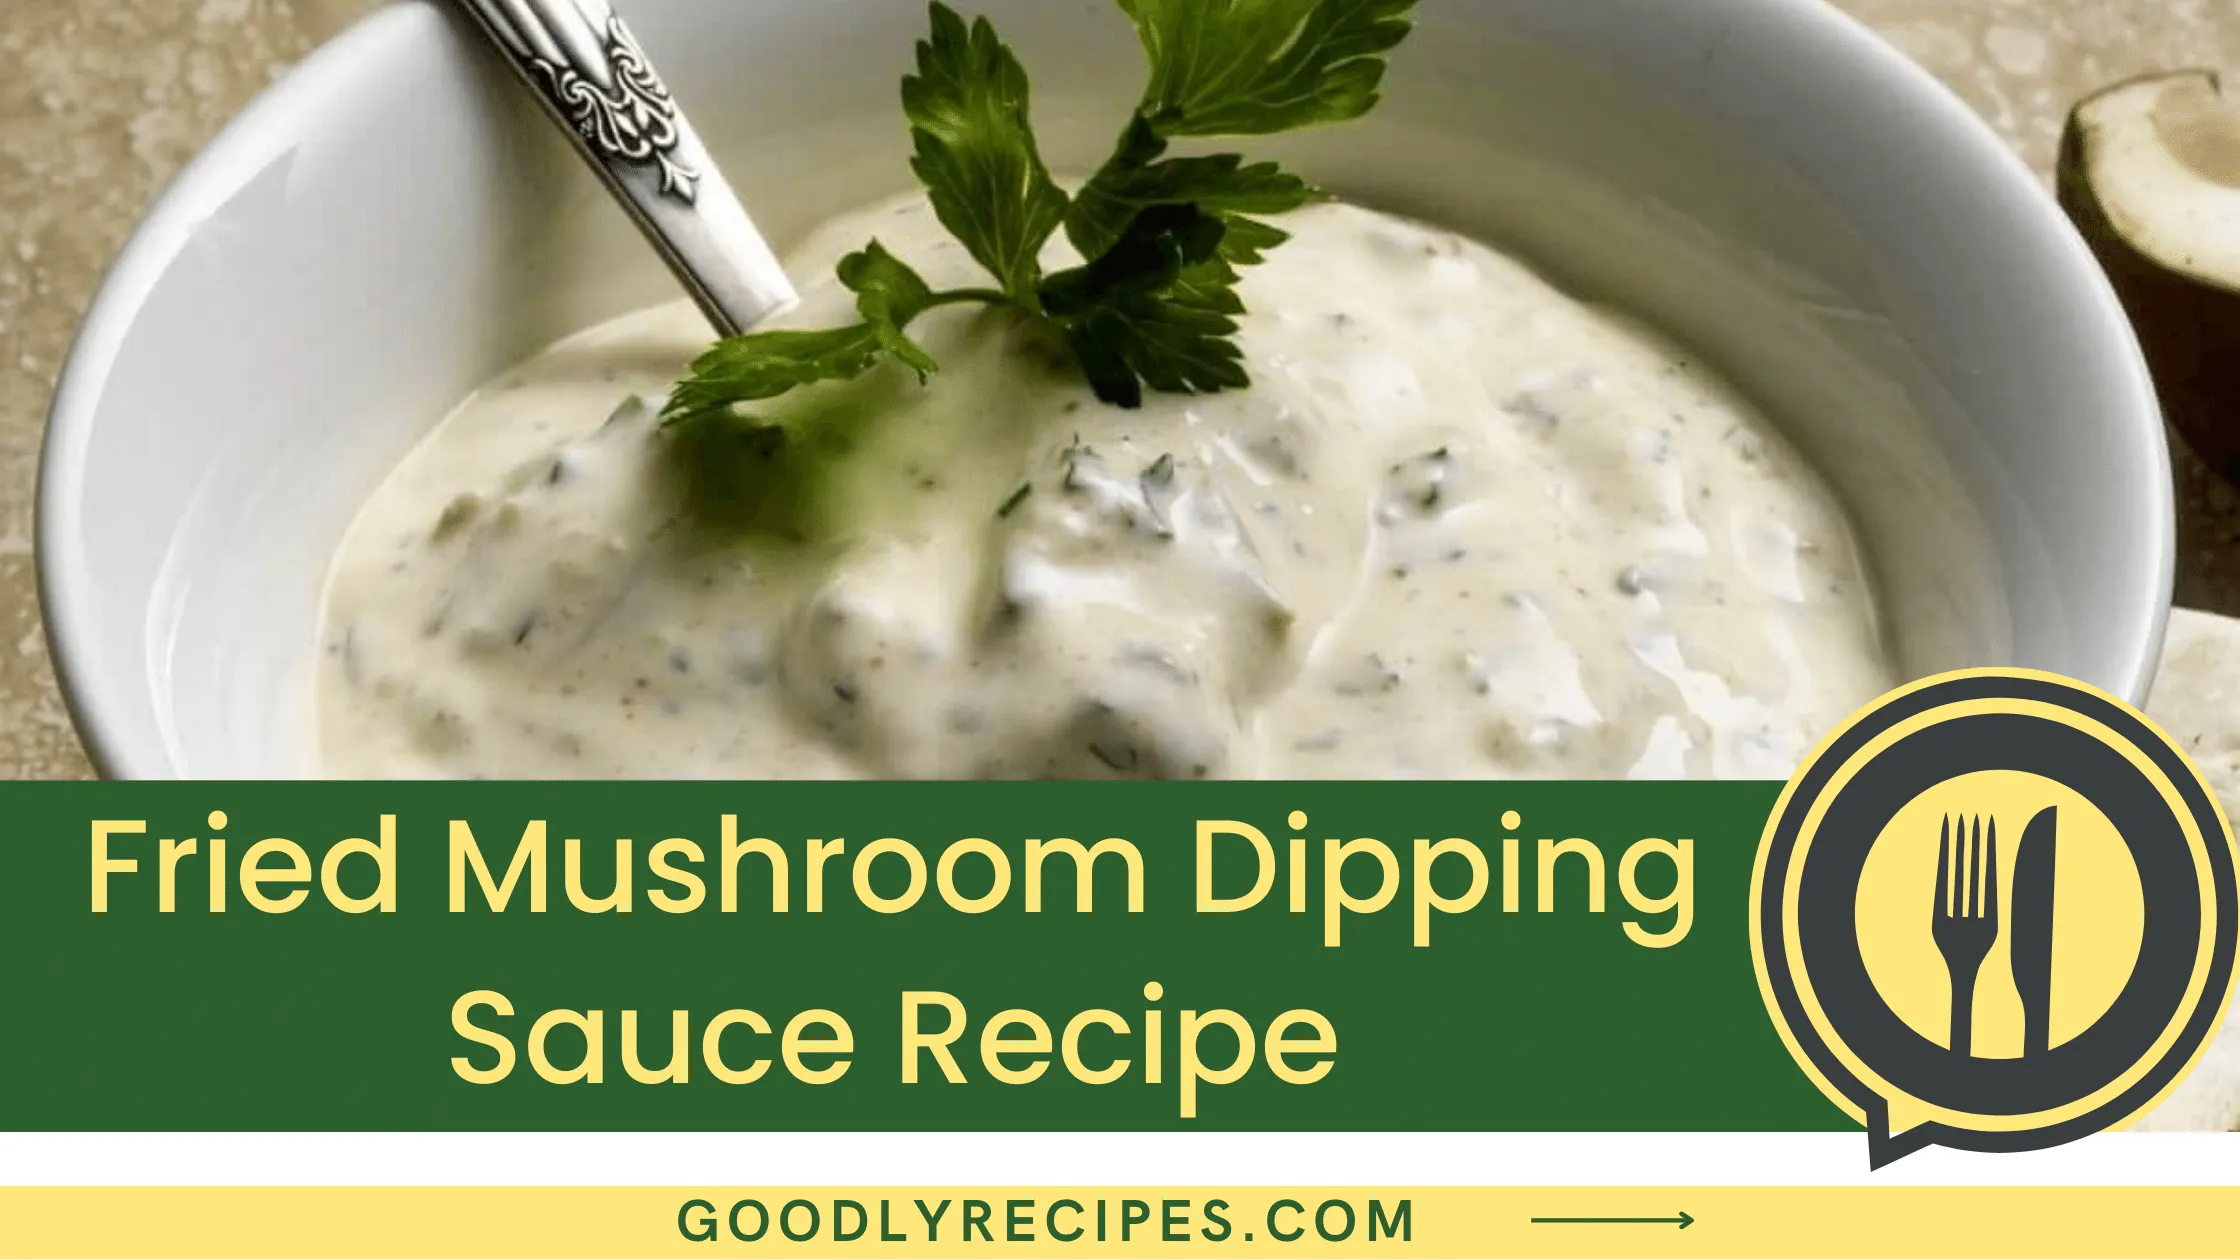 What Is Fried Mushroom Dipping Sauce?